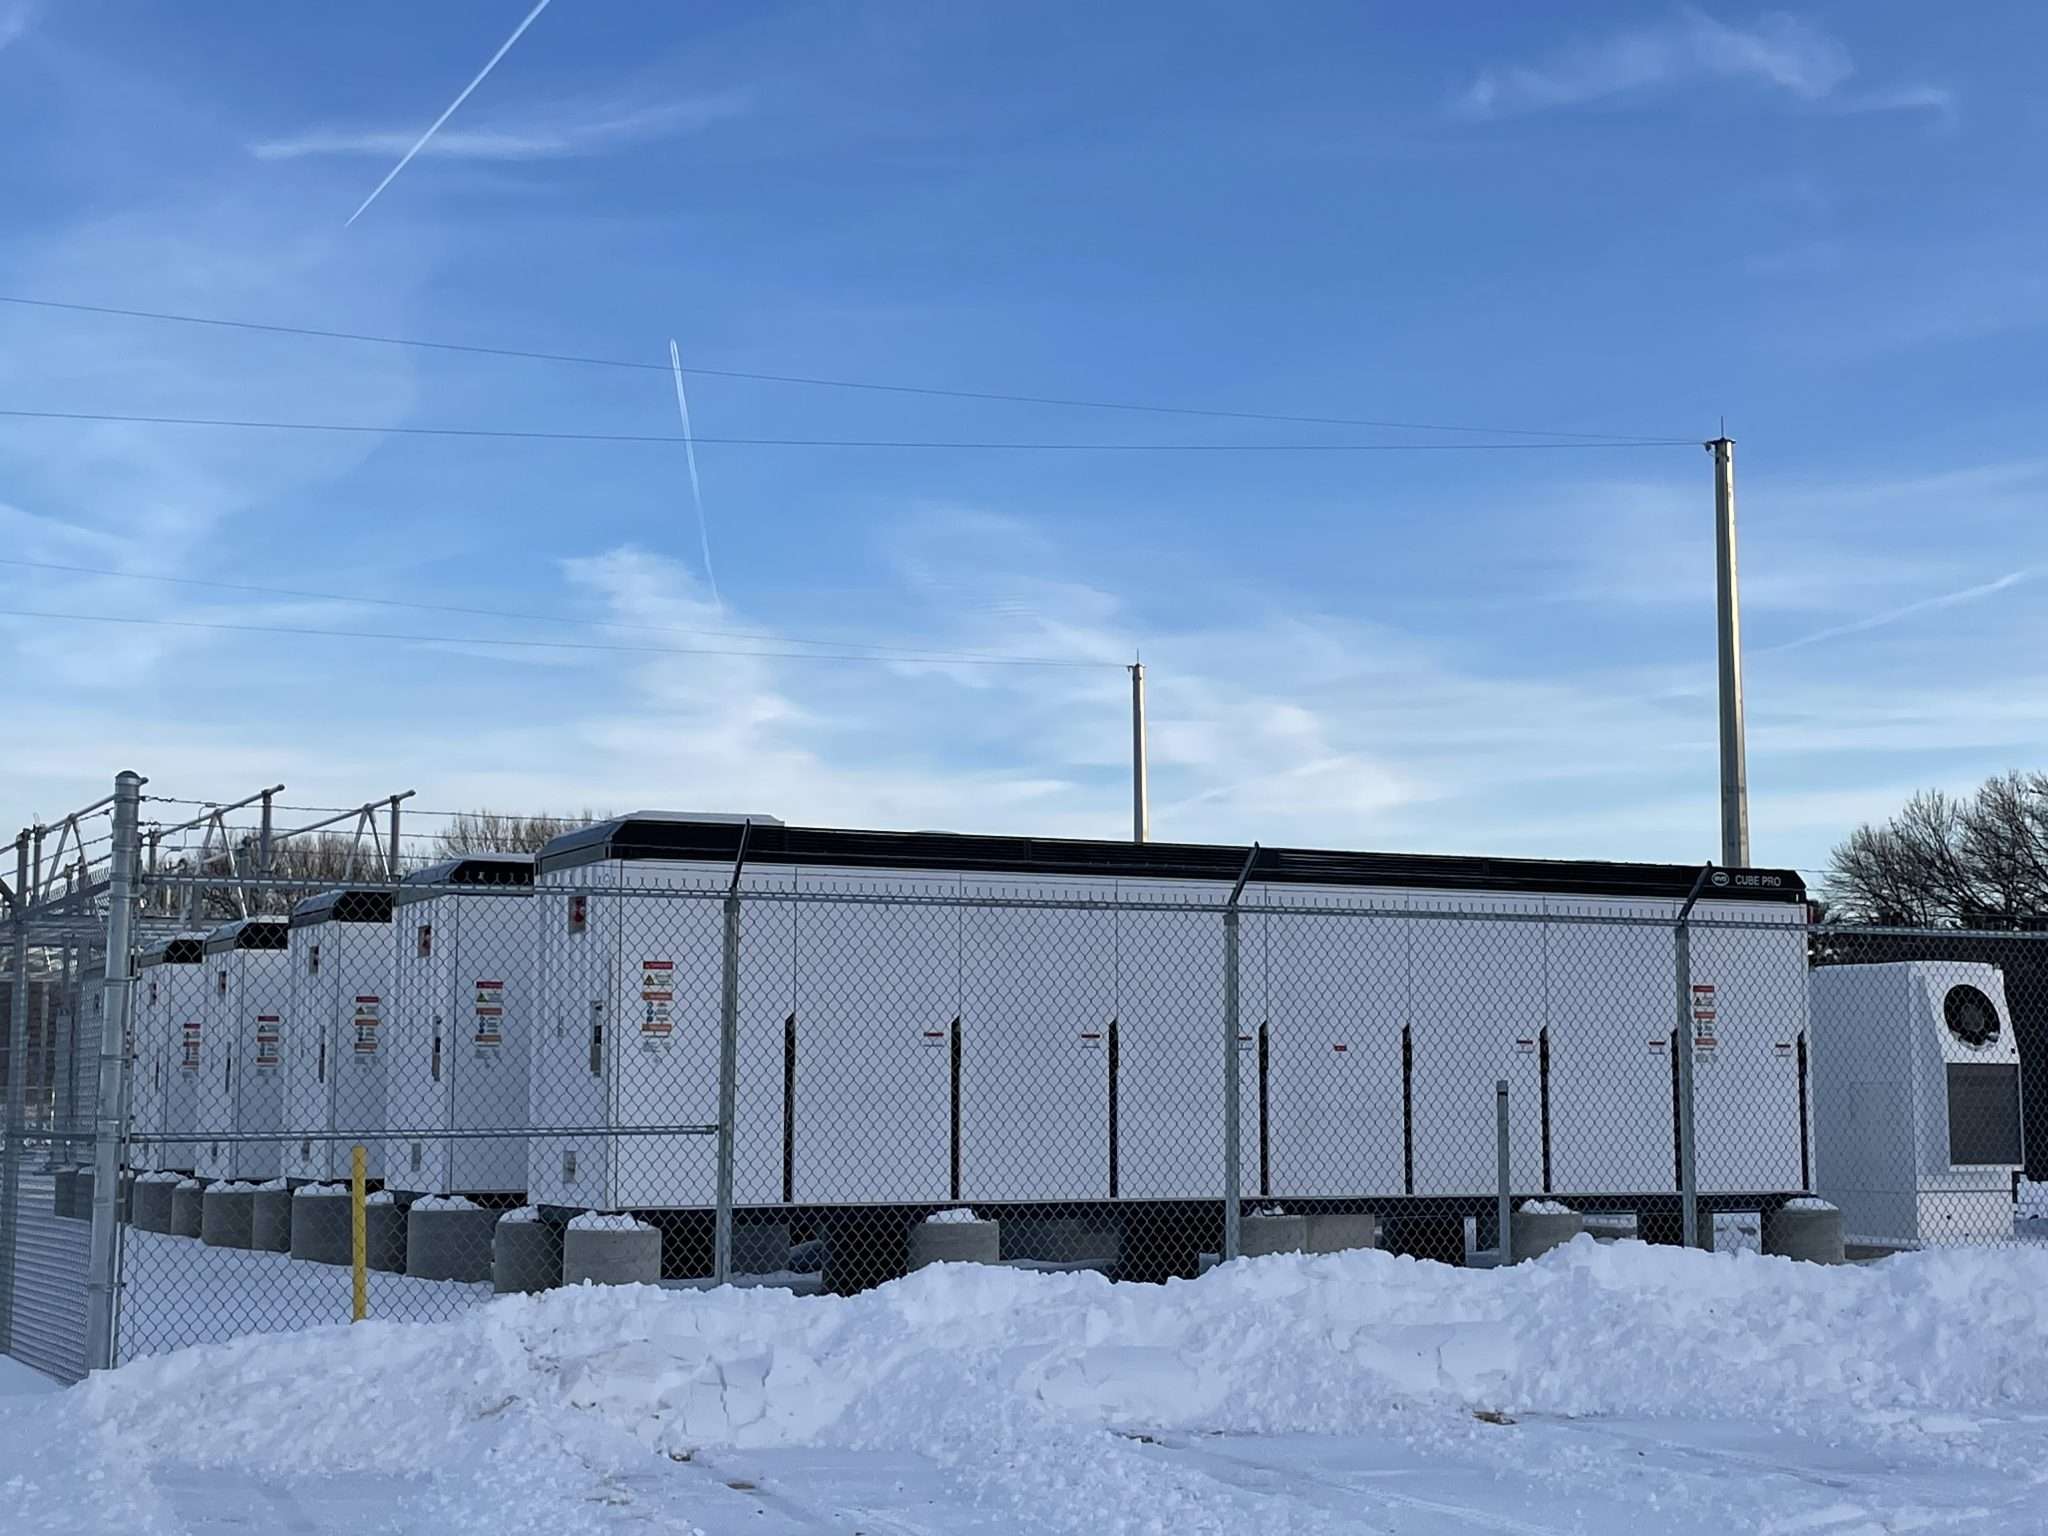 These battery modules, supplied by the battery company BYD, show a similar-sized project to the one proposed in the hamlet of Raquette Lake. The batteries look like a long trailer on concrete mounts.